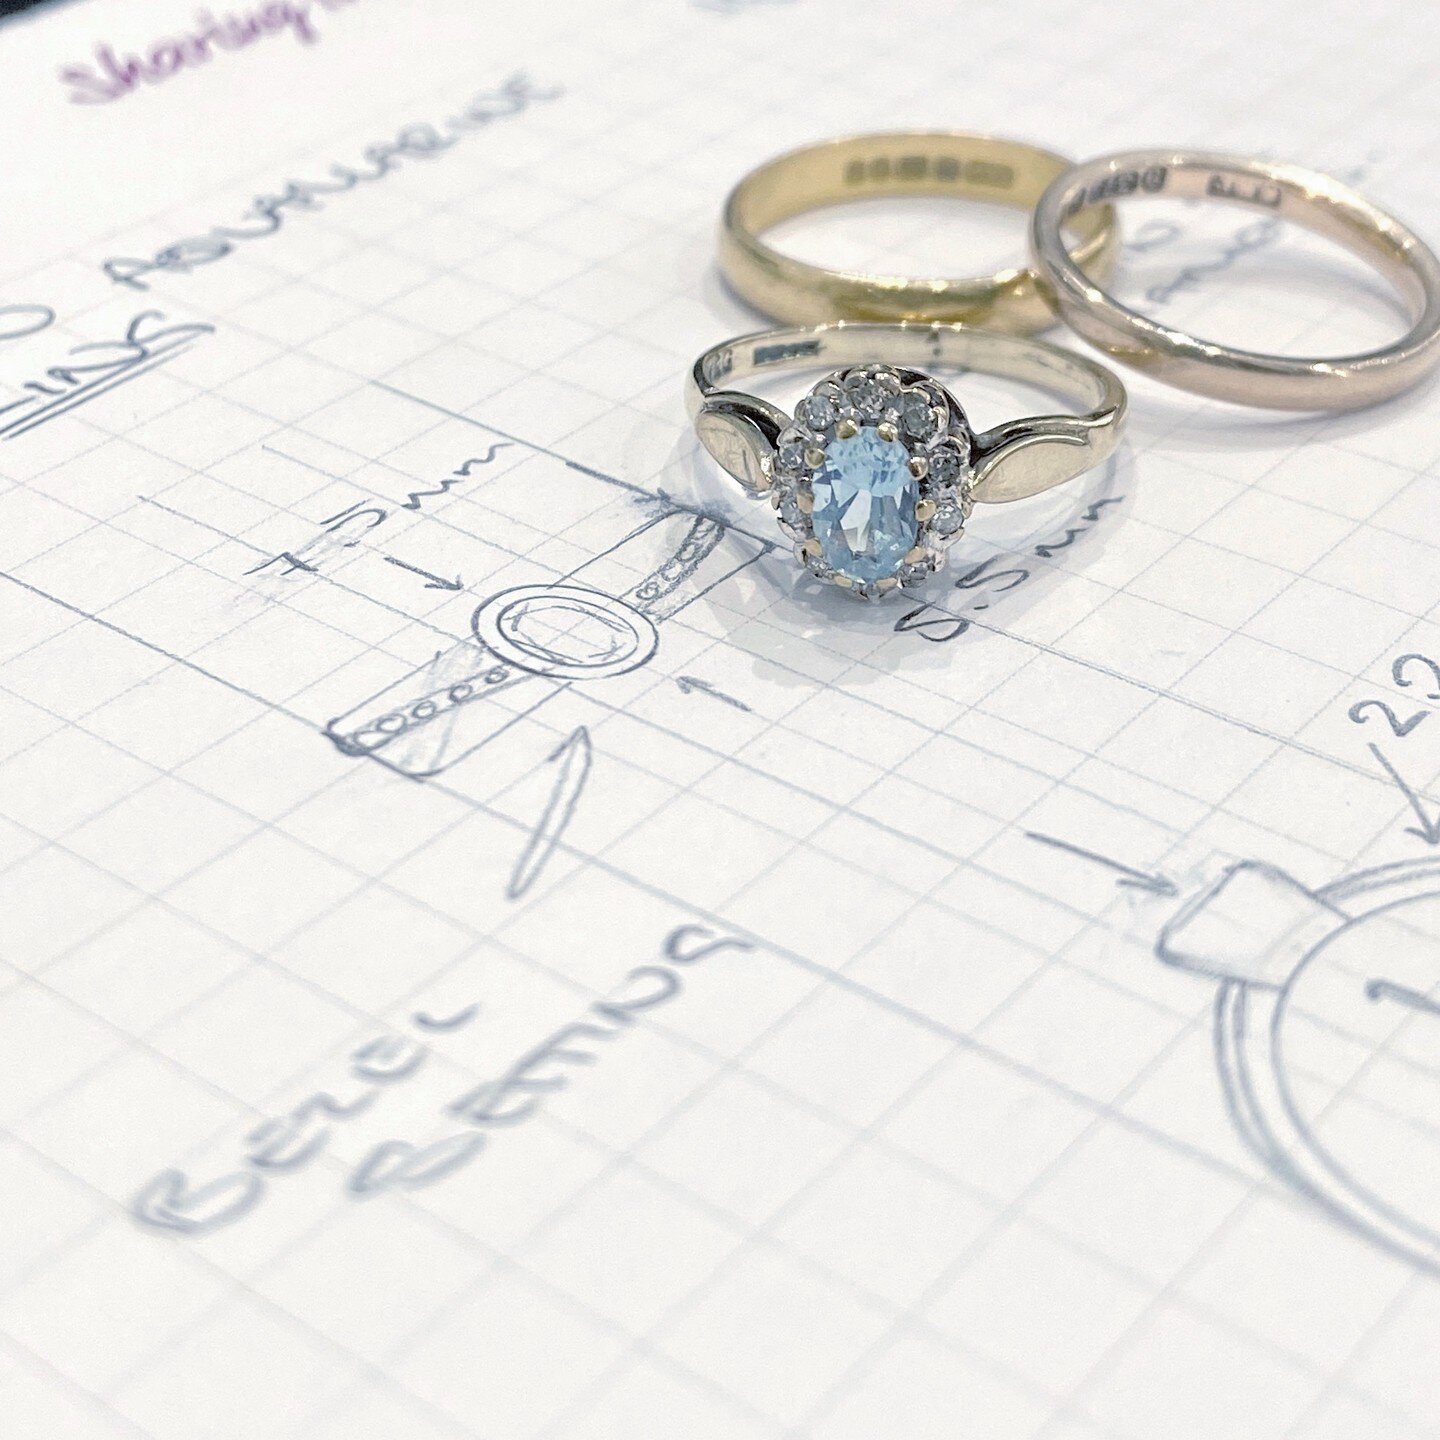 We try to draw out as much detail as we can in your design appointment so that you can see the finer details of things like the settings and the shoulders of your new ring before you go ahead.

We can either start with a stone and create a design aro